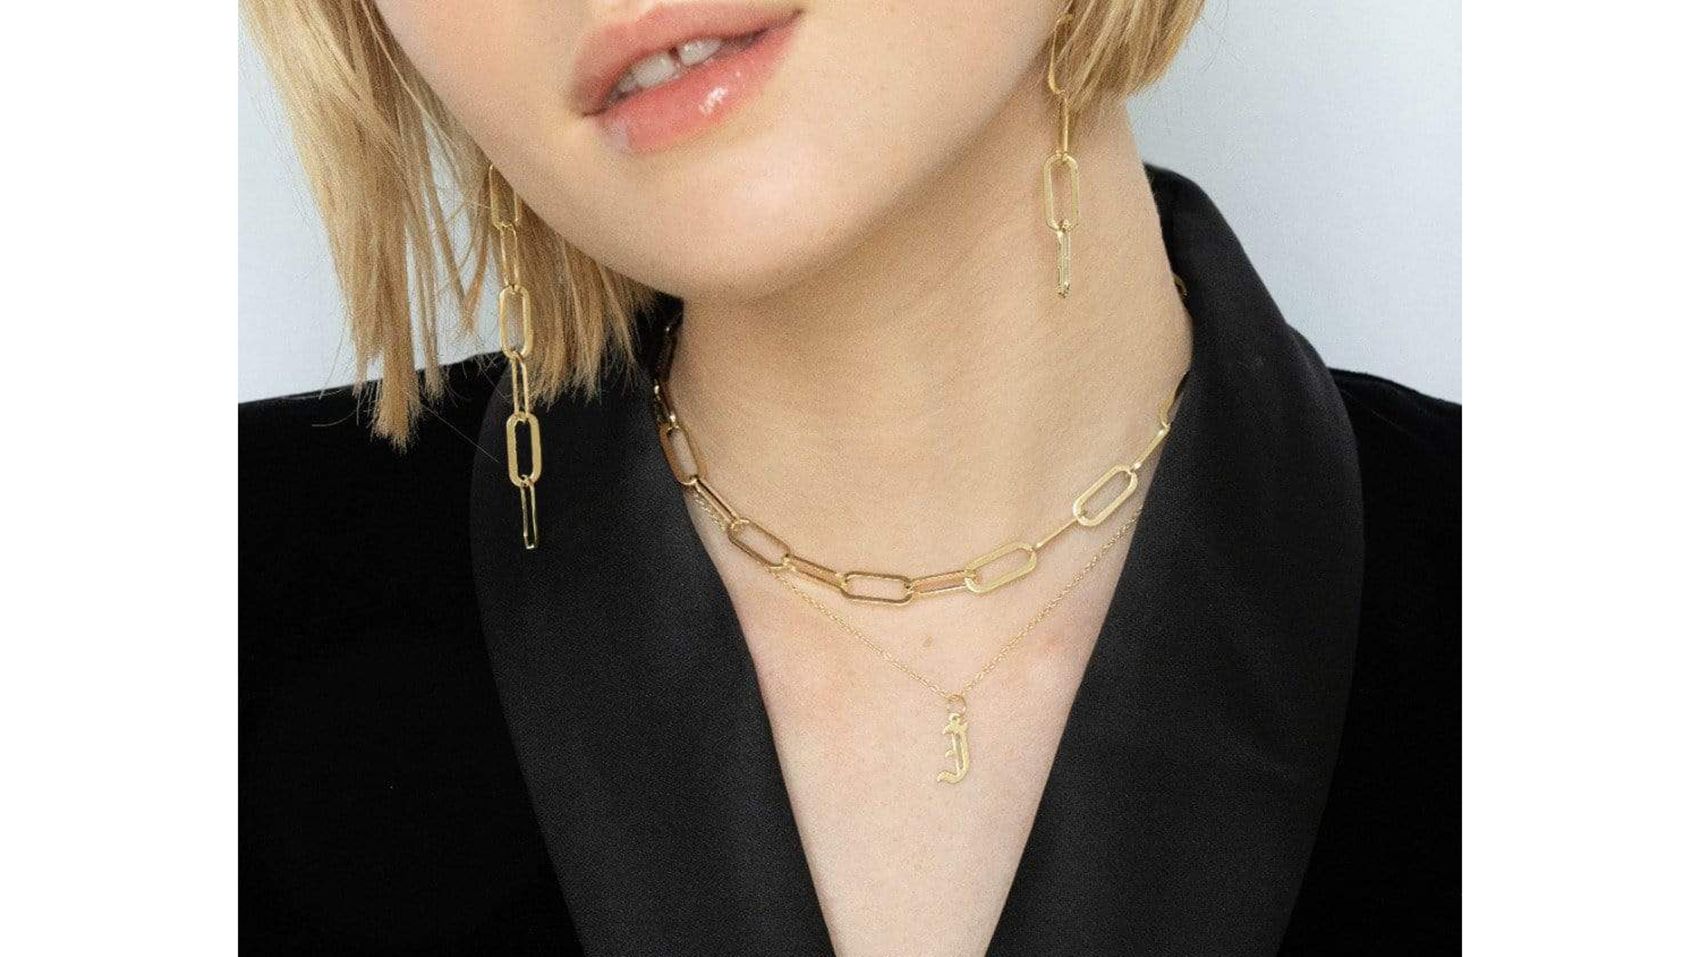 Anyone know where I can find similar and cheaper jewelry like the